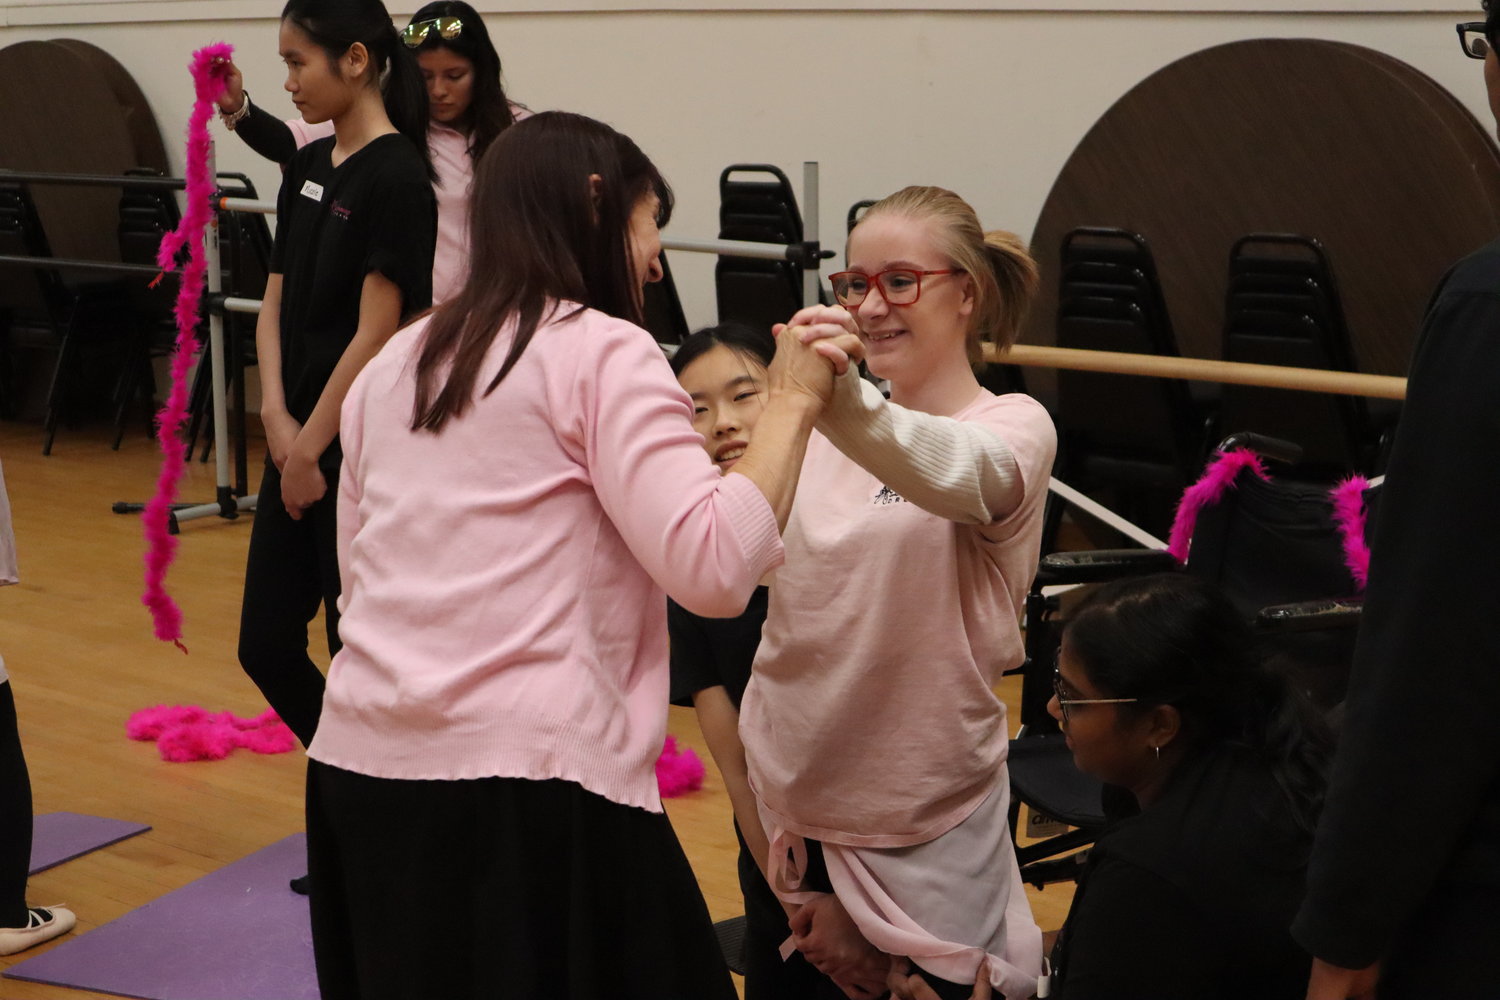 Joann Ferrara, owner of Dancing Dreams, makes sure to put a smile on all of her dancer's faces.